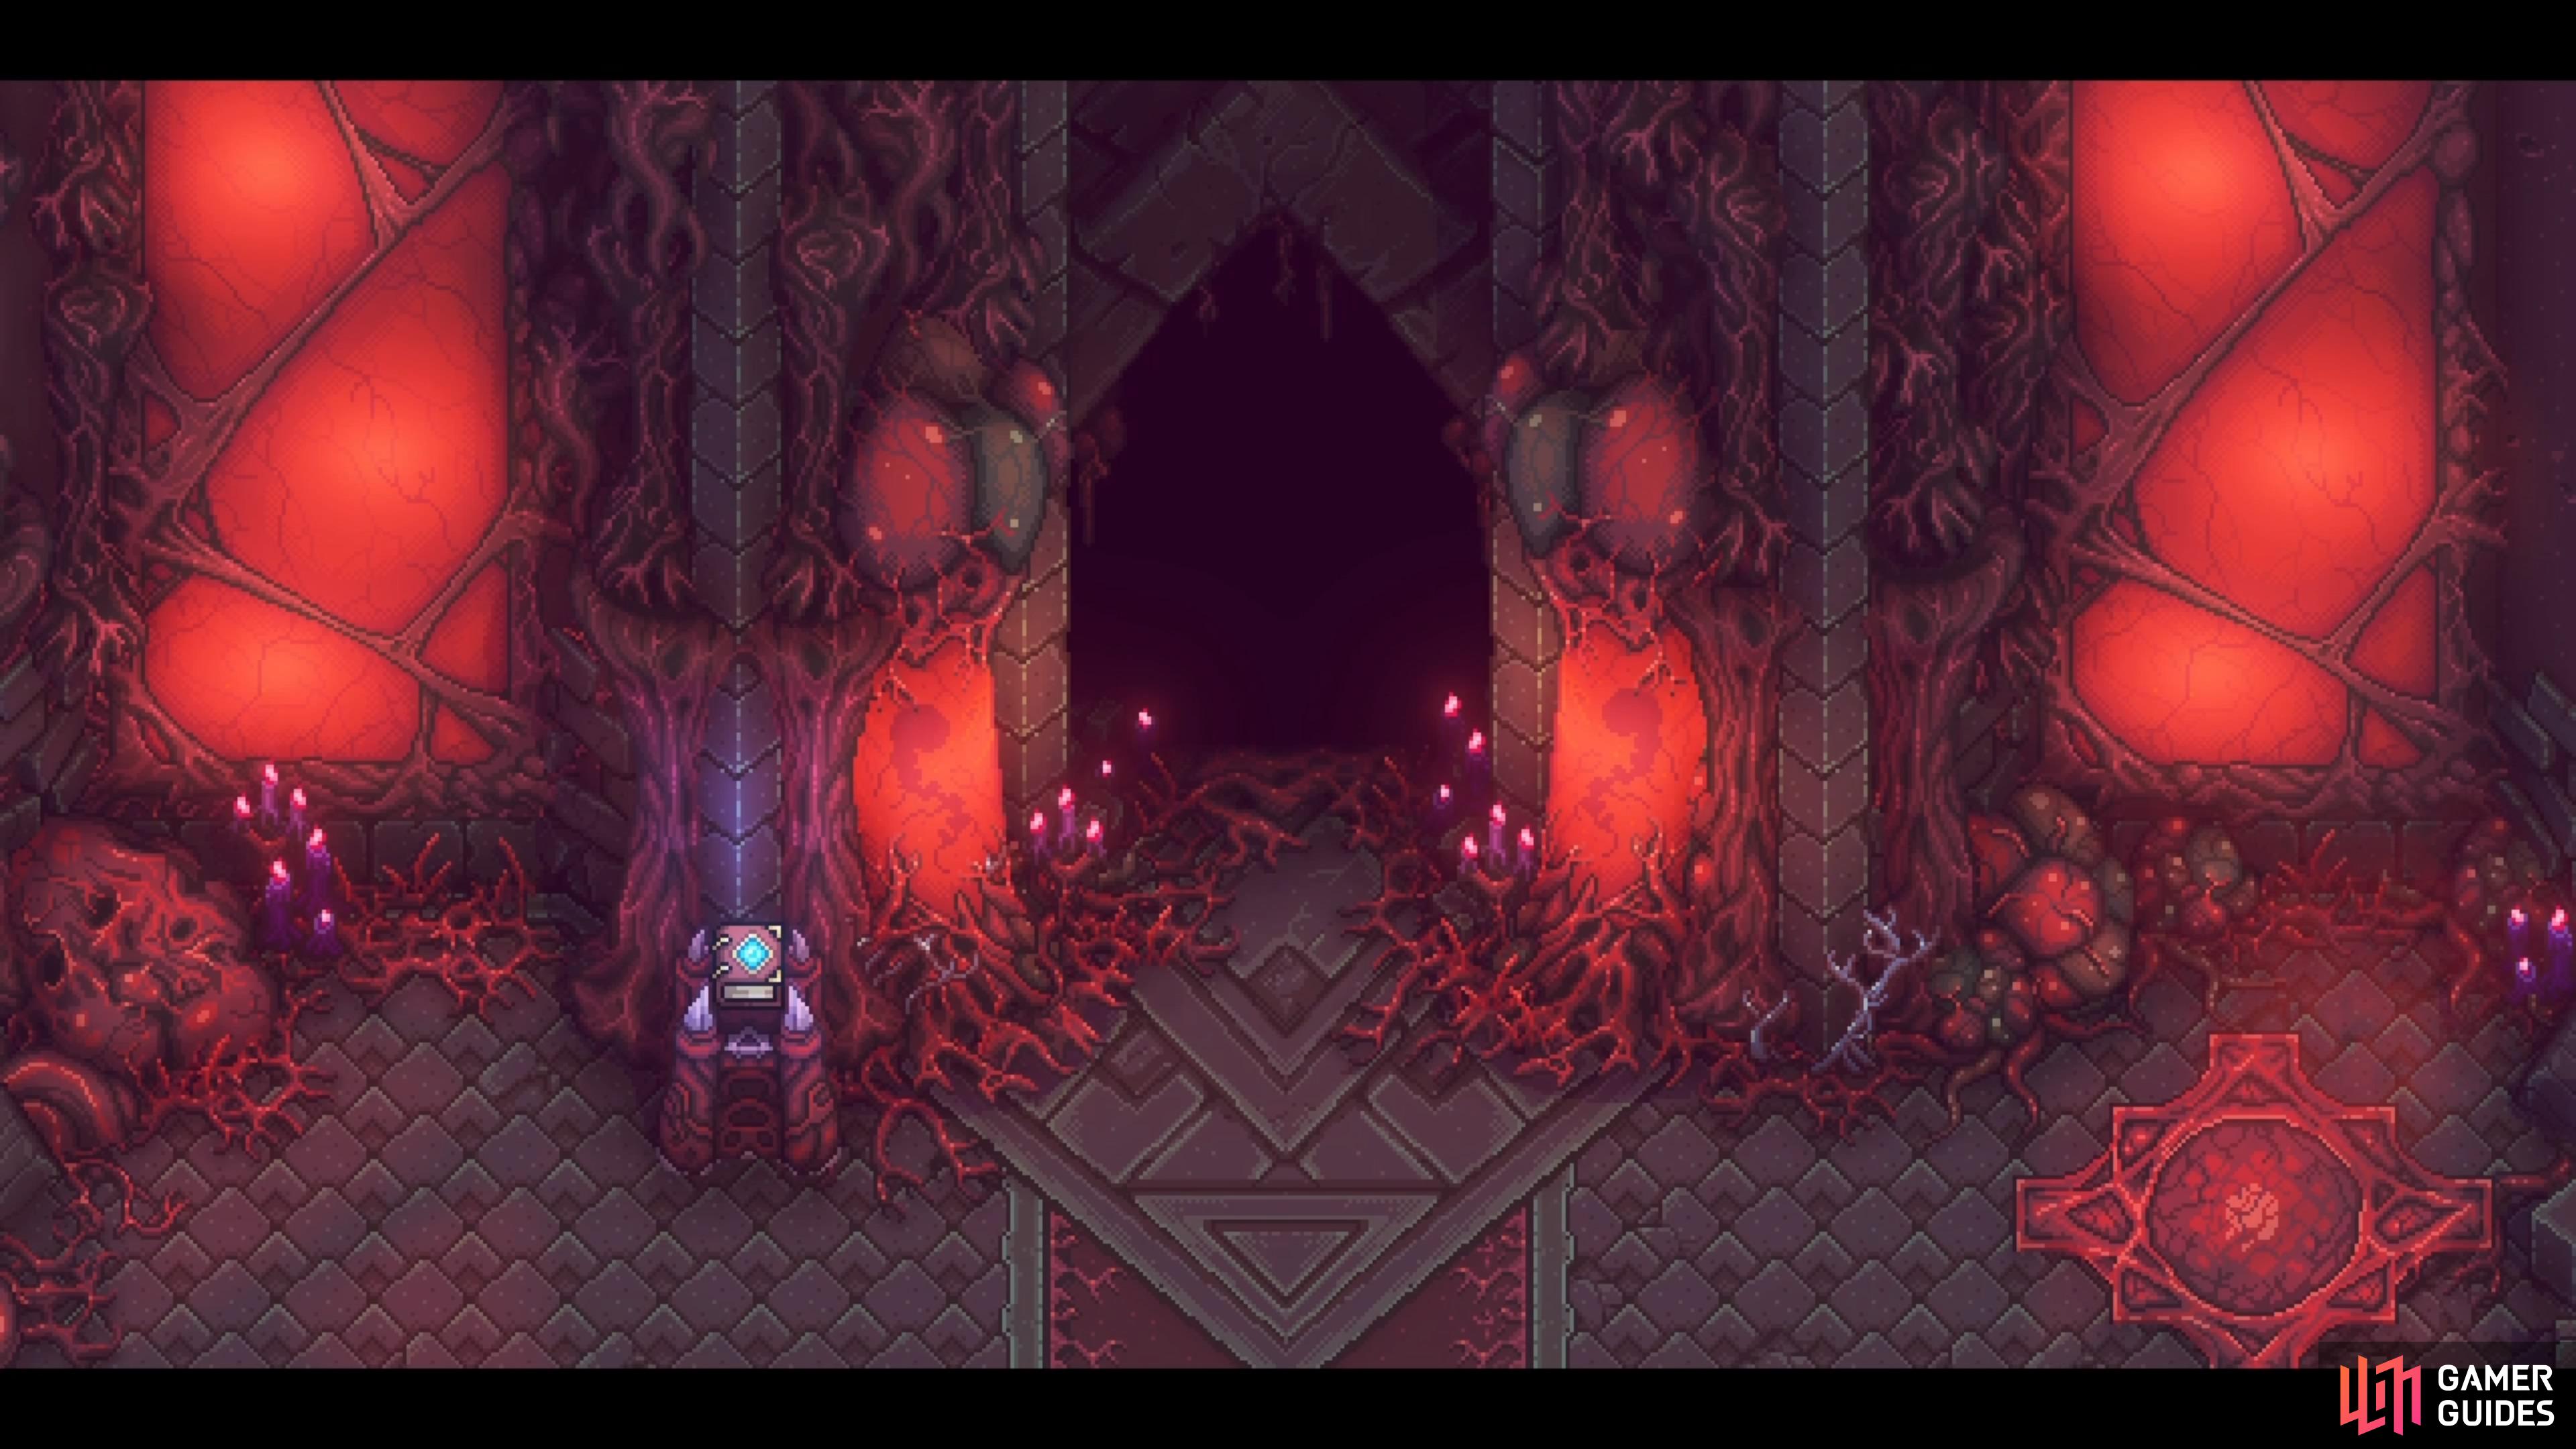 The Fleshmancer’s Lair will be the final dungeon of the main story.